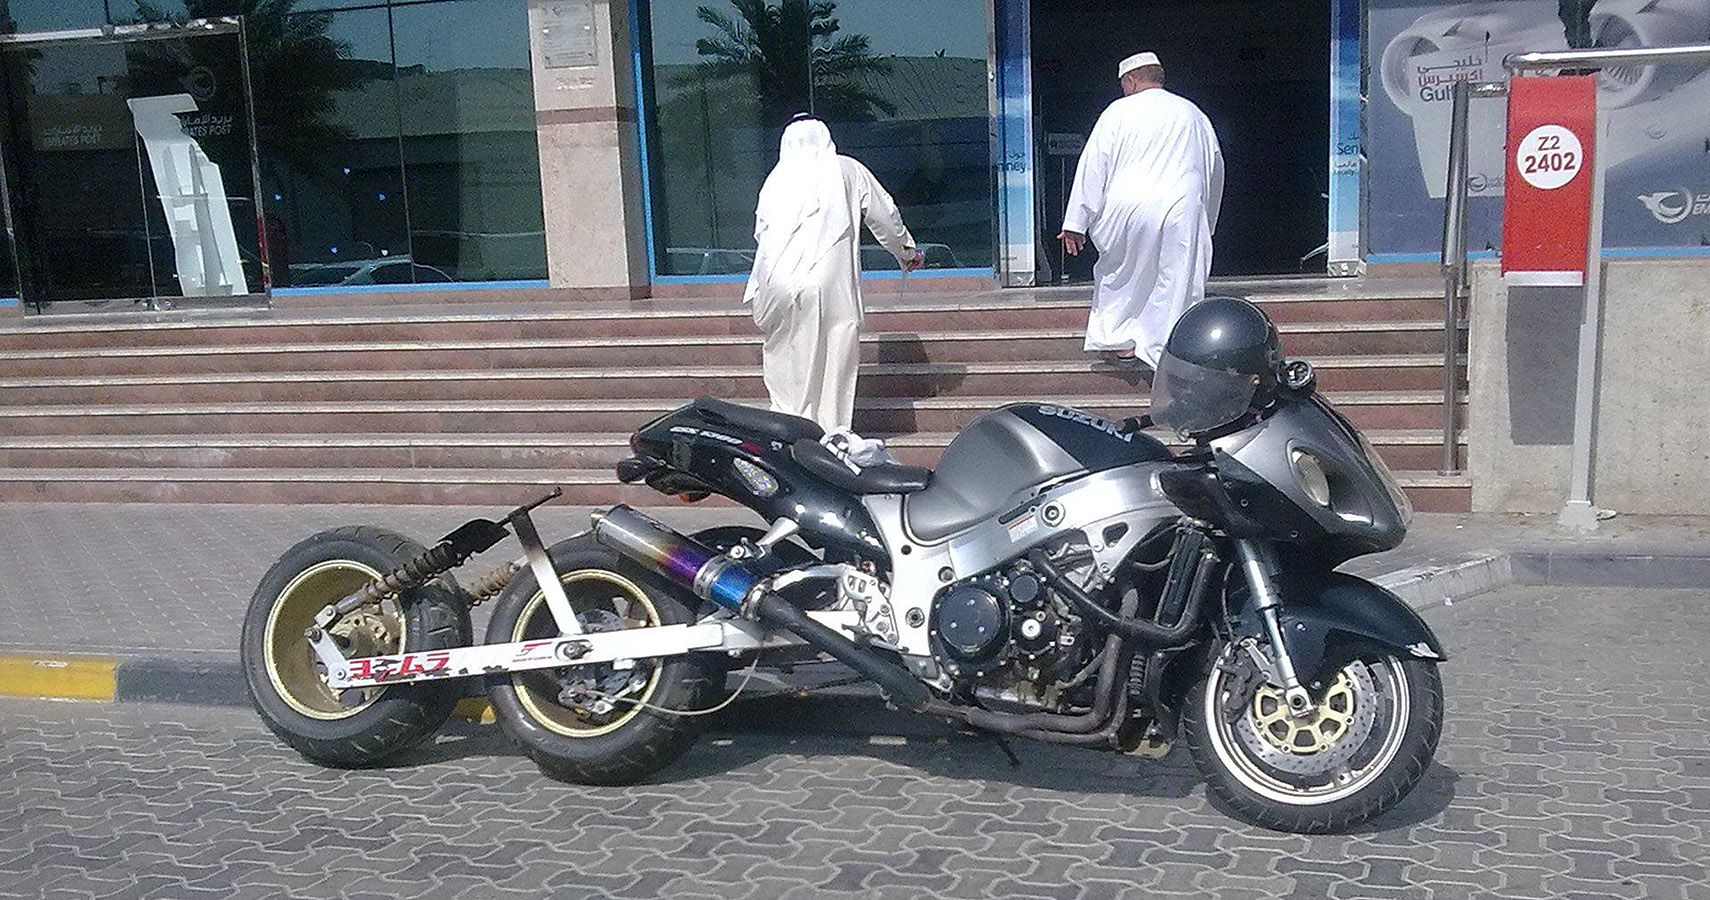 A Very Weird Three-Tired Motorcycle